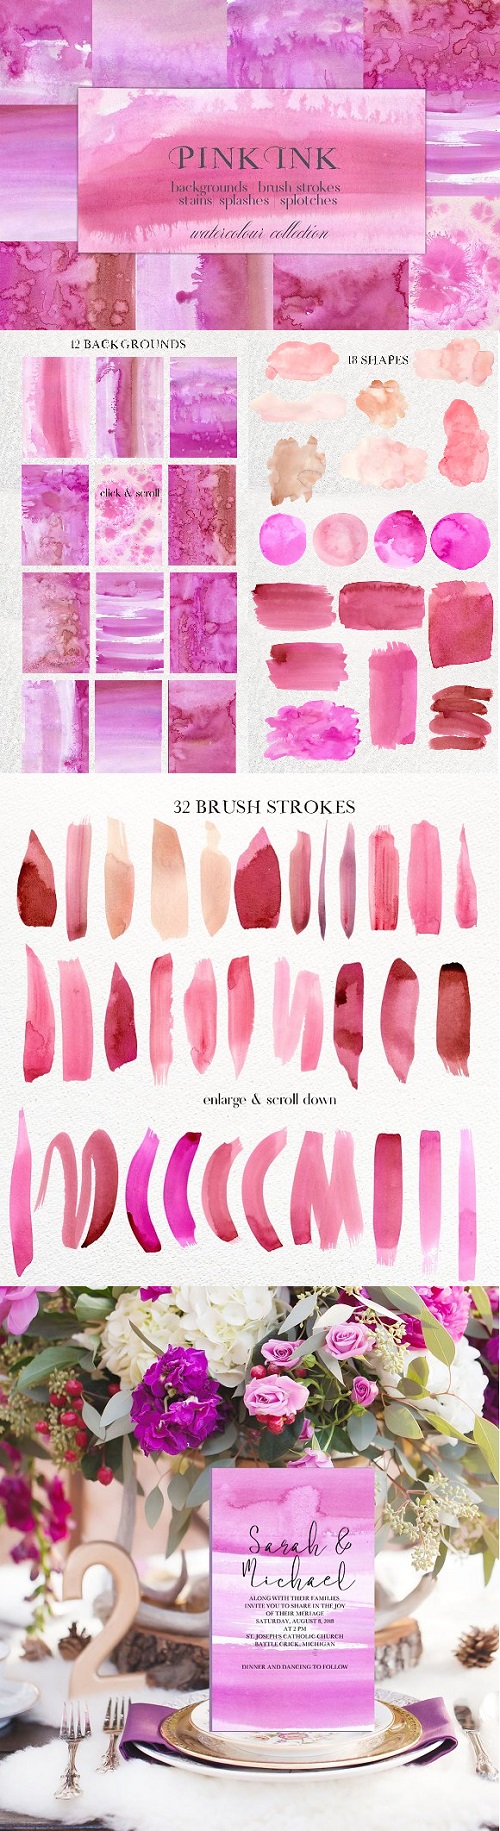 Pink Ink Watercolor Washes Splotches - 2036942